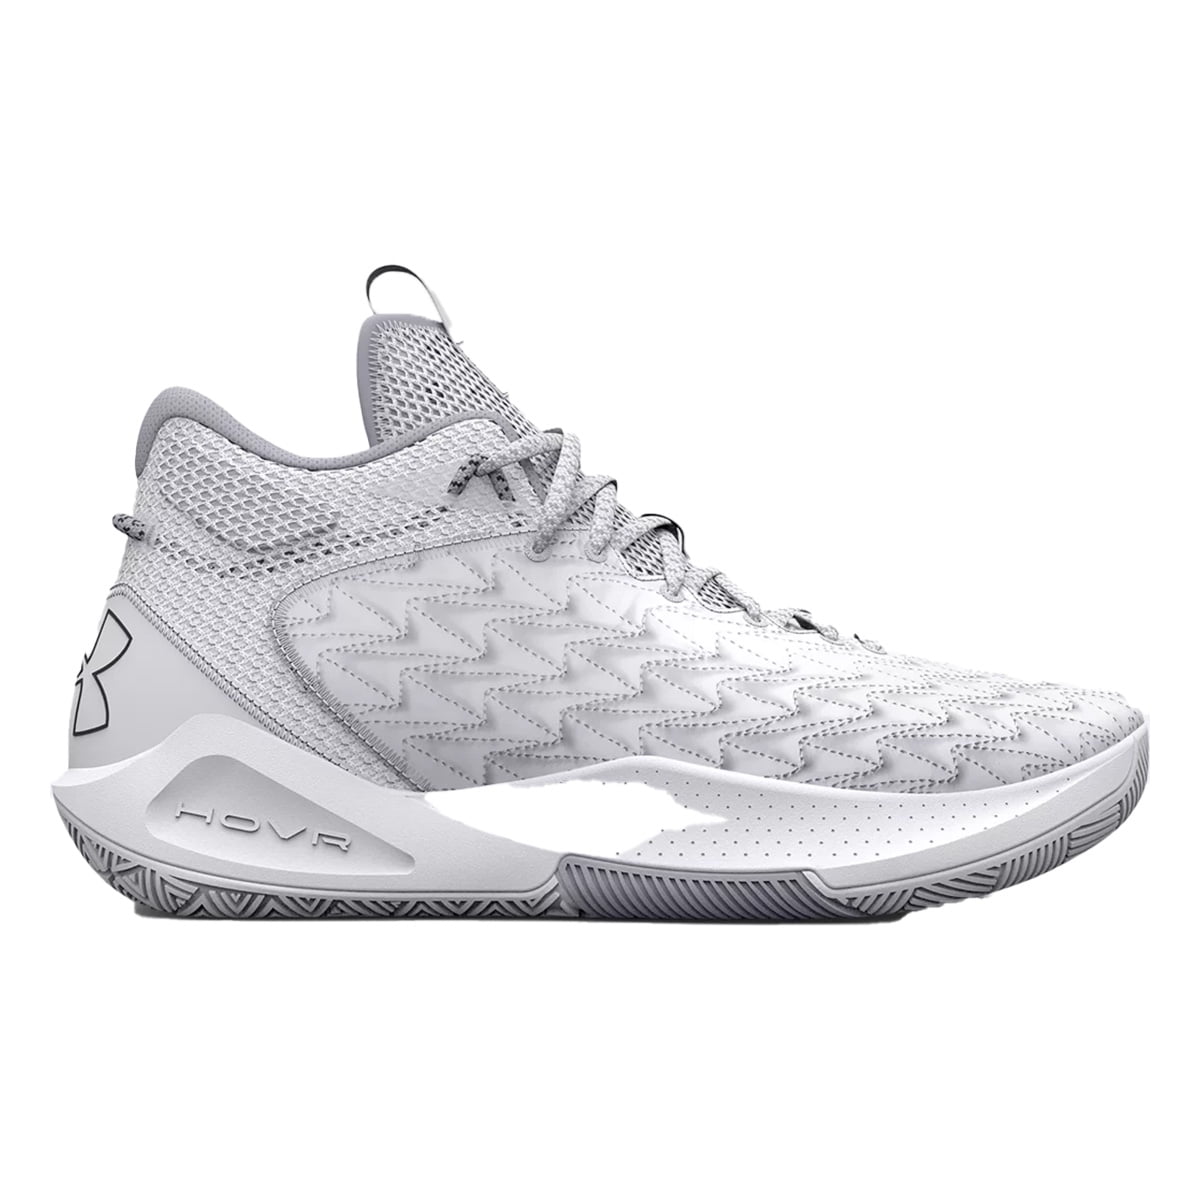 Under Armour HOVR Havoc 5 Clone Basketball Shoes White